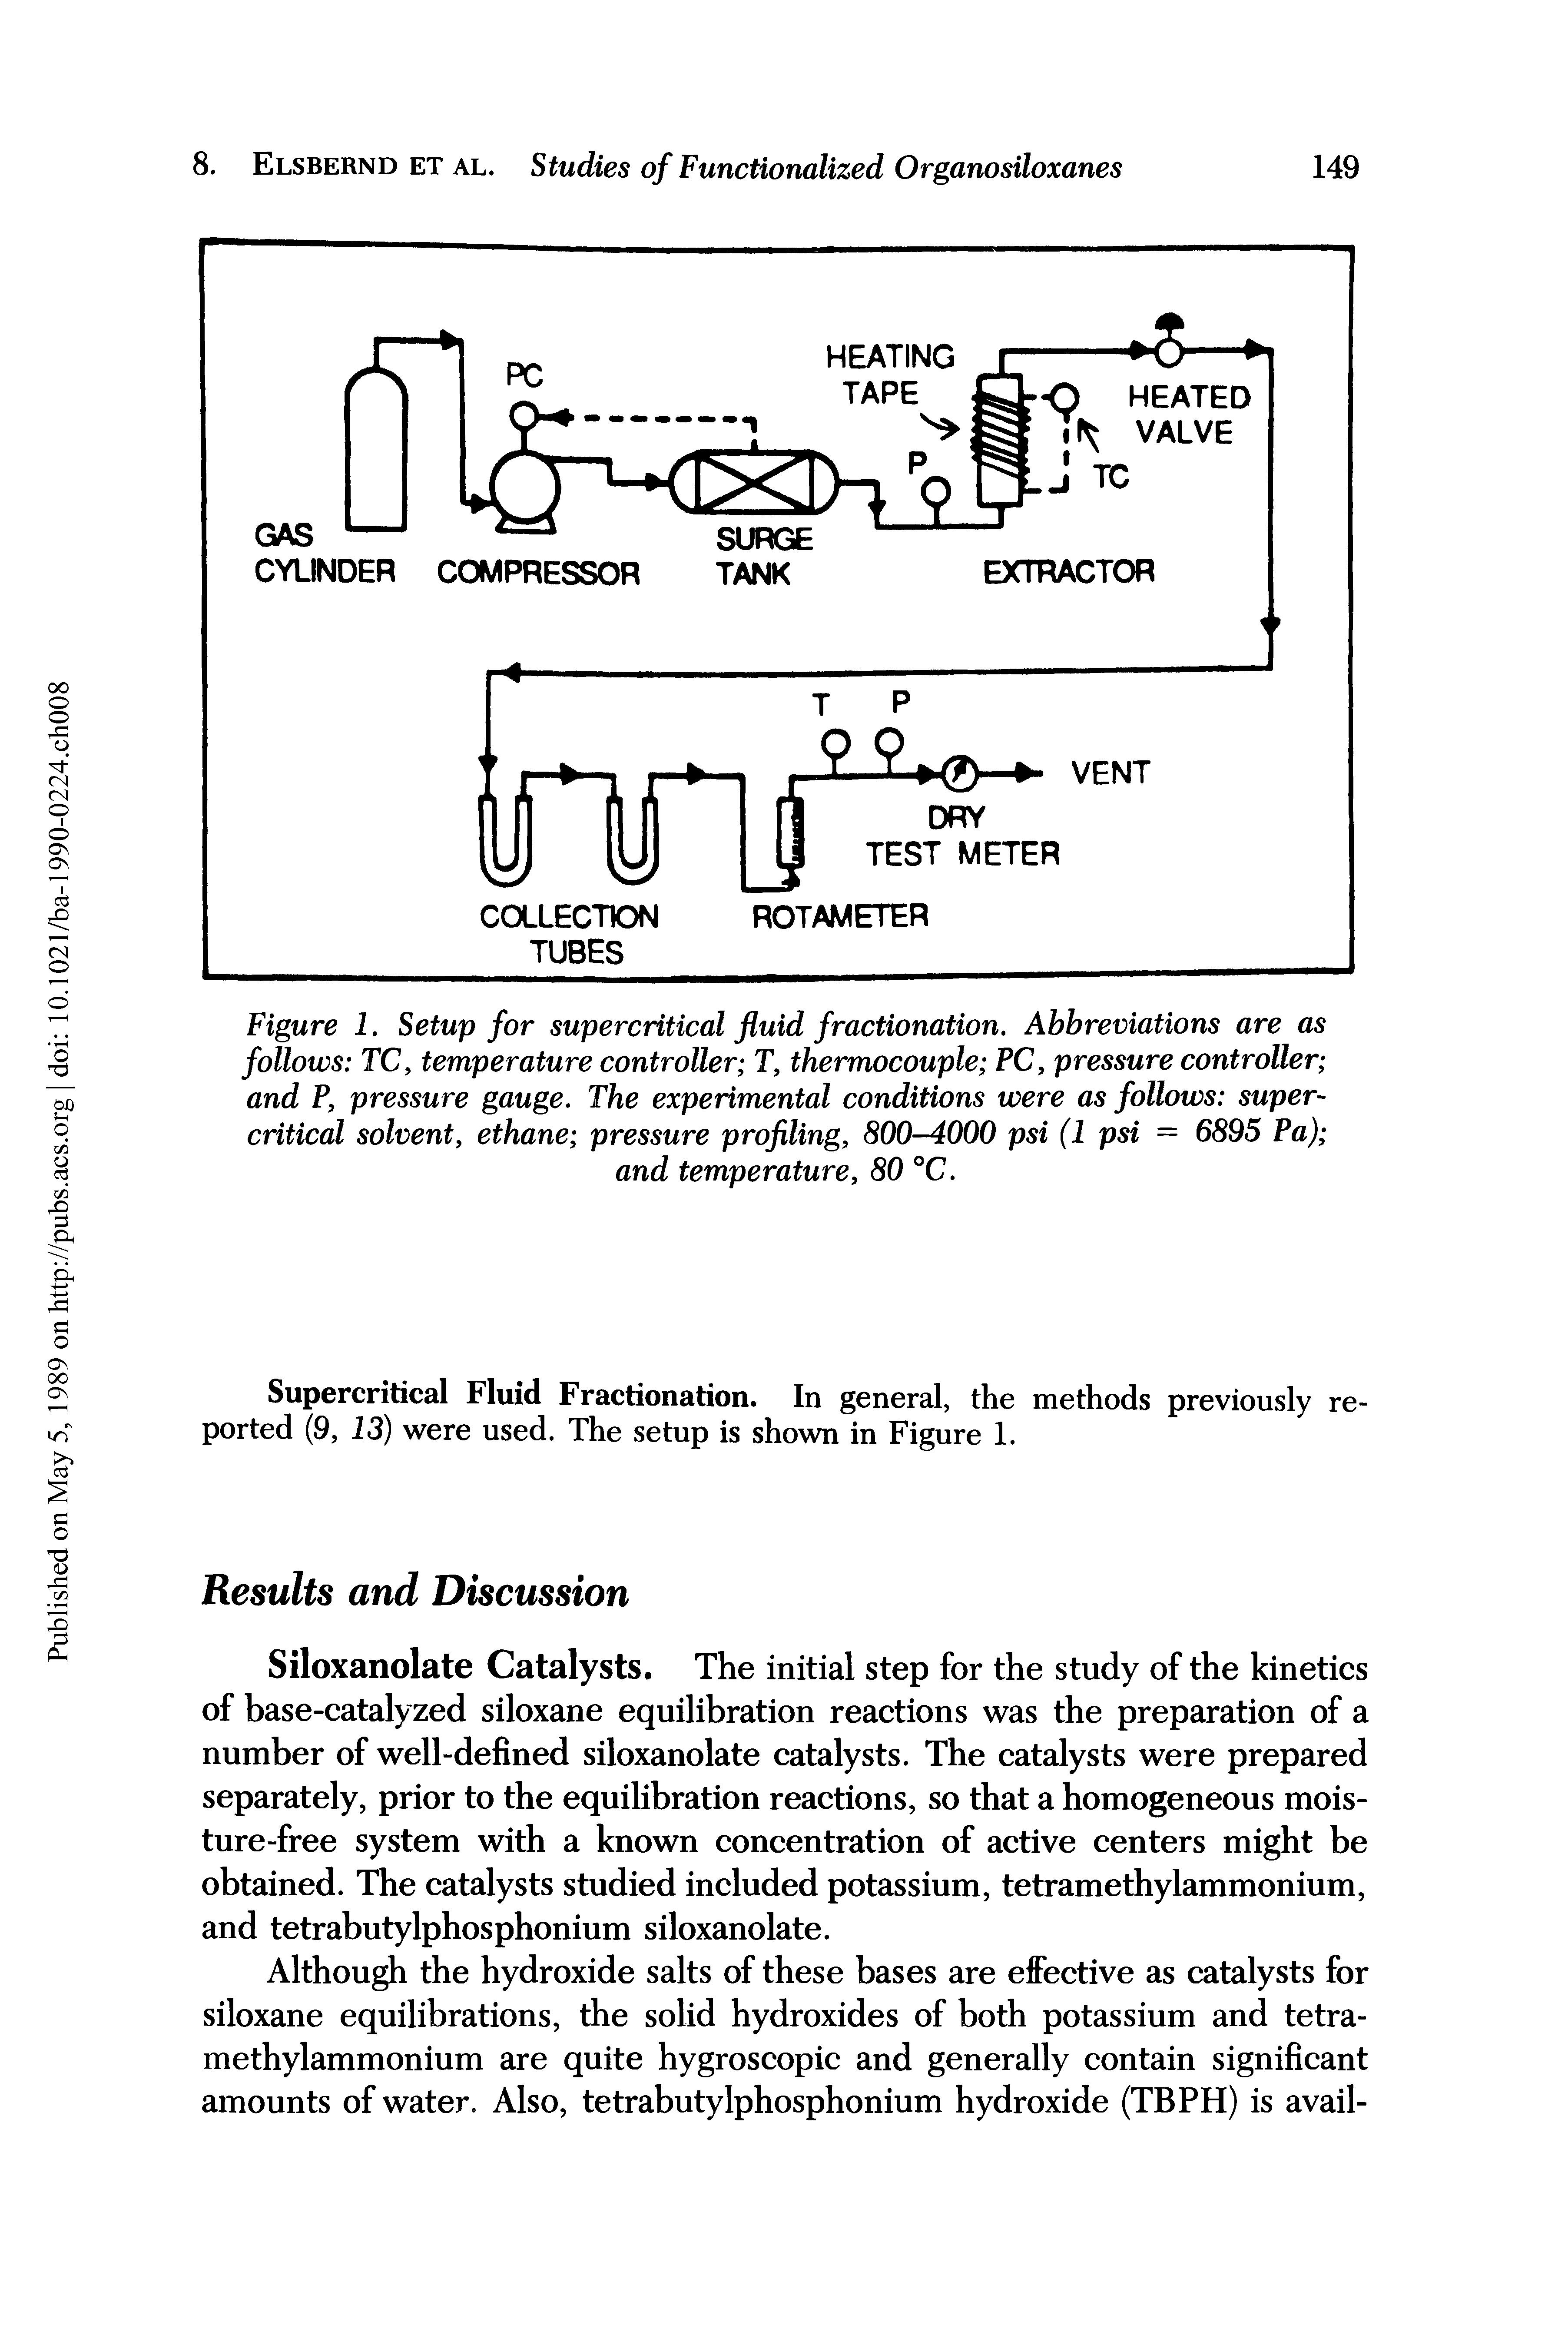 Figure 1. Setup for supercritical fluid fractionation. Abbreviations are as follows TC, temperature controller T, thermocouple PC, pressure controller and P, pressure gauge. The experimental conditions were as follows supercritical solvent, ethane pressure profiling, 800-4000 psi (1 psi = 6895 Pa) and temperature, 80 °C.